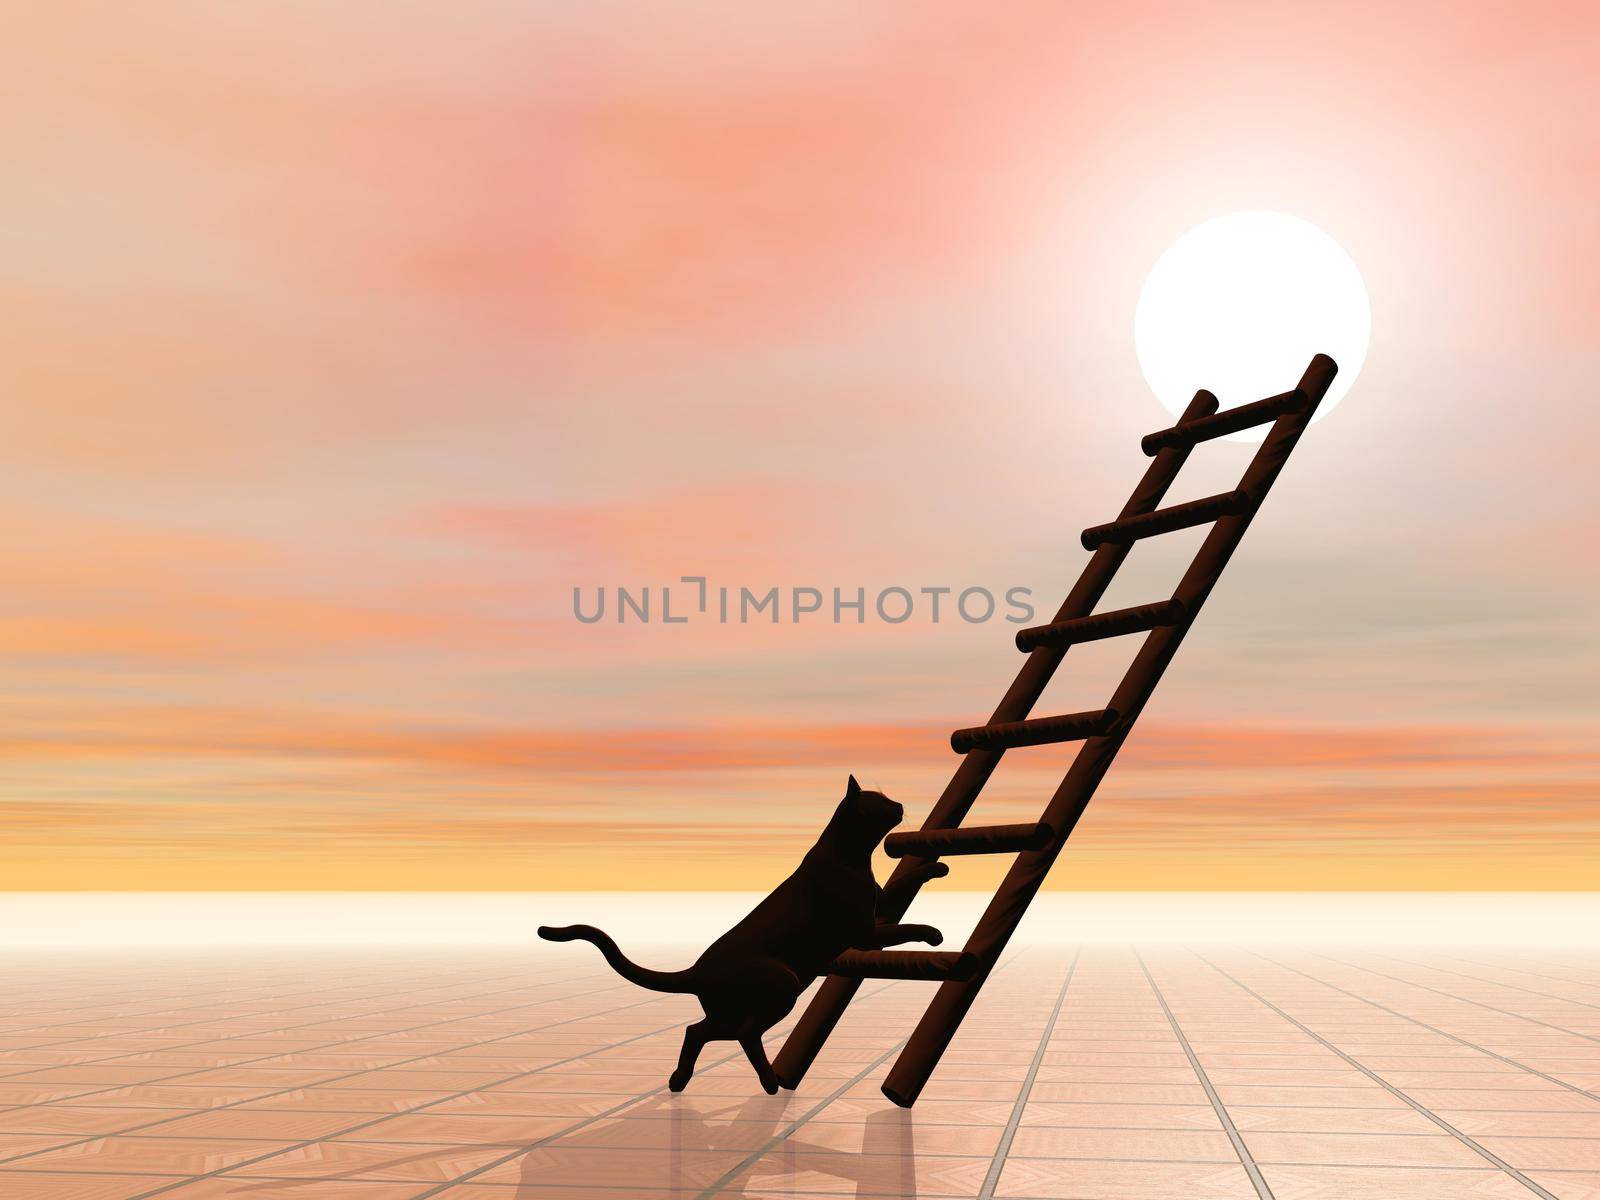 Black silhouette of cat walking towards a ladder leading to the sun